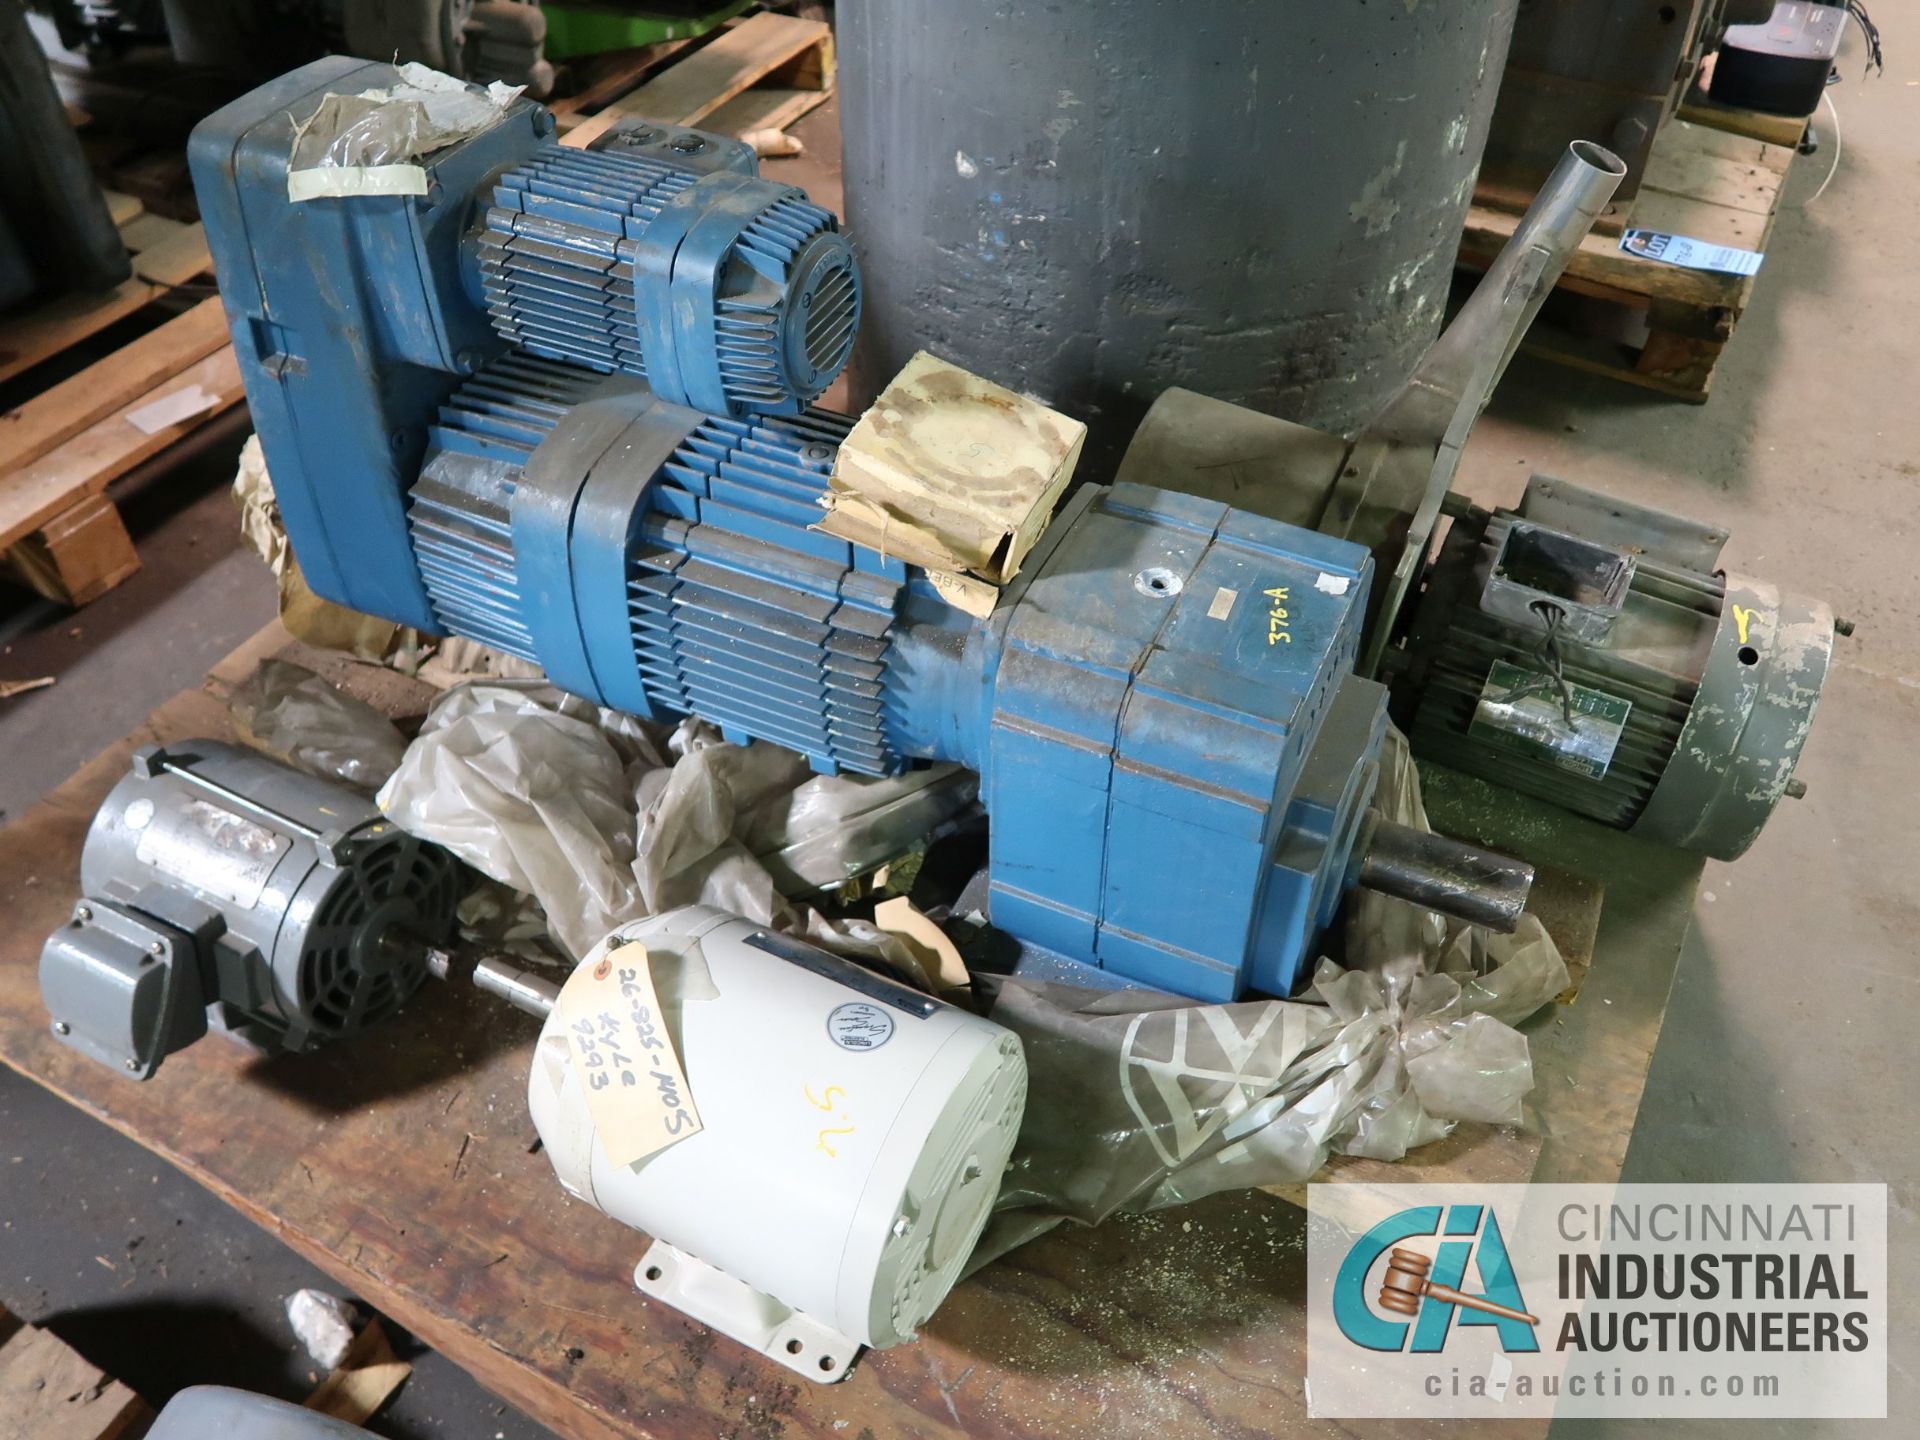 MOTORS ON SKID - 7-1/2 HP LINCOLN, 1 HP, 5 HP AND DEMAG GEAR REDUCER